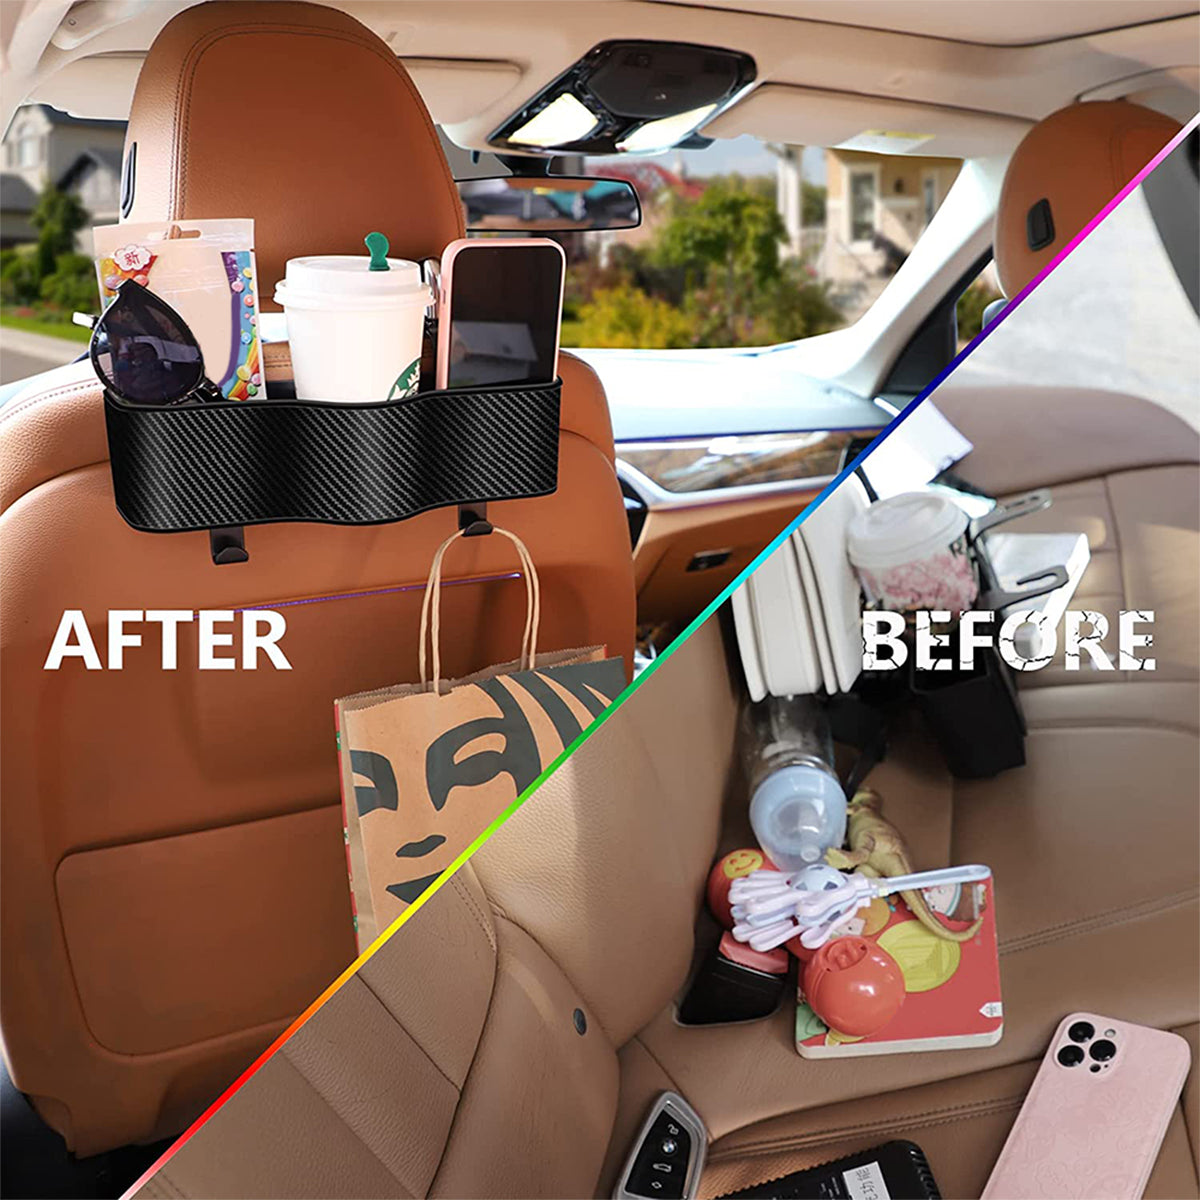 Car Headrest Backseat Organizer with Cup Holders, Custom-Fit For Car, Seat Back Organizer Perfect for Eating in Your Car, Back Seat Organizer for Kids DLHY242